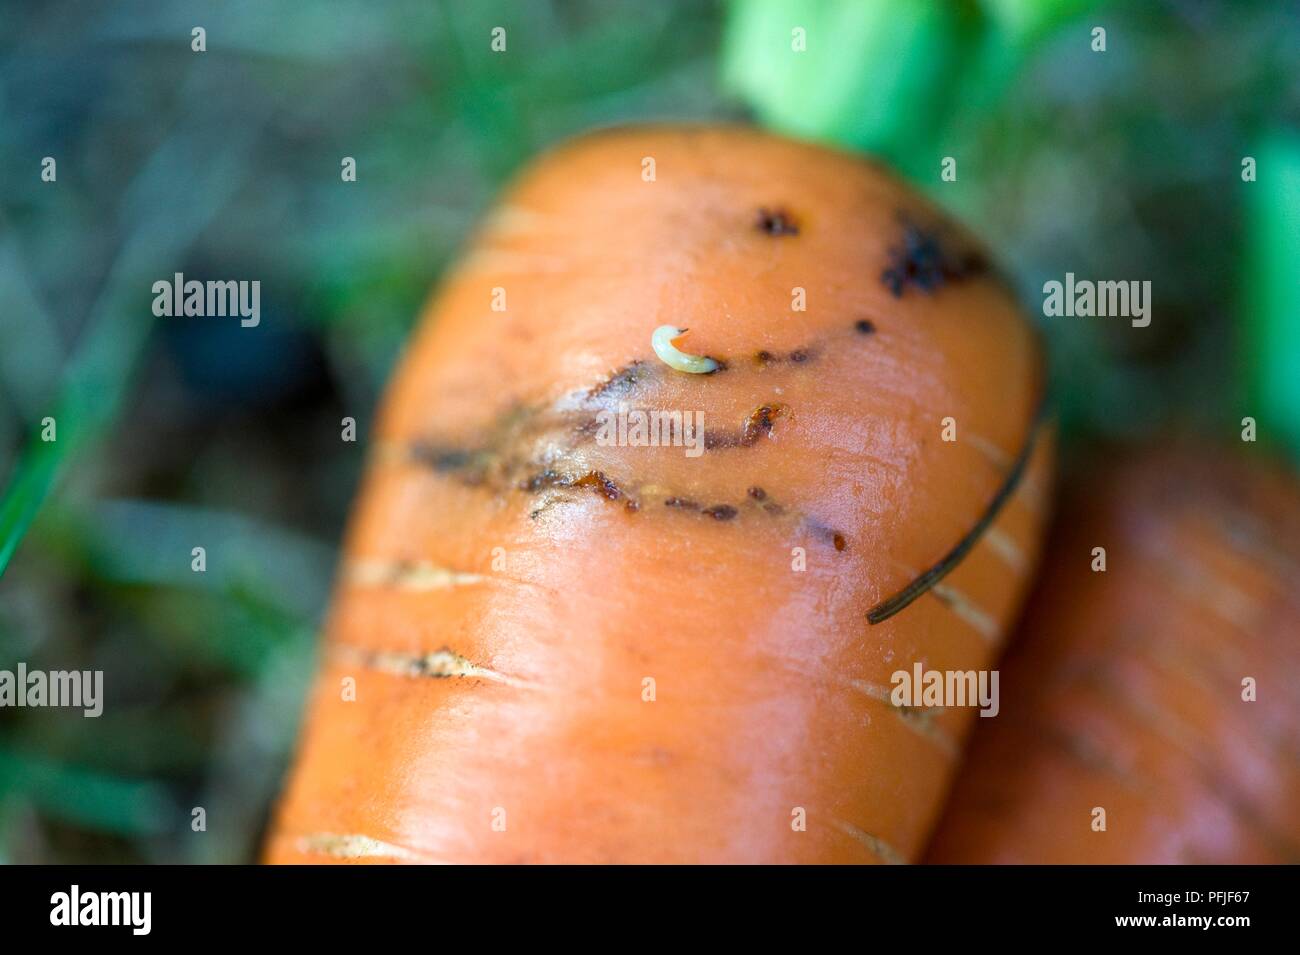 Carrot infested with carrot fly, close-up Stock Photo